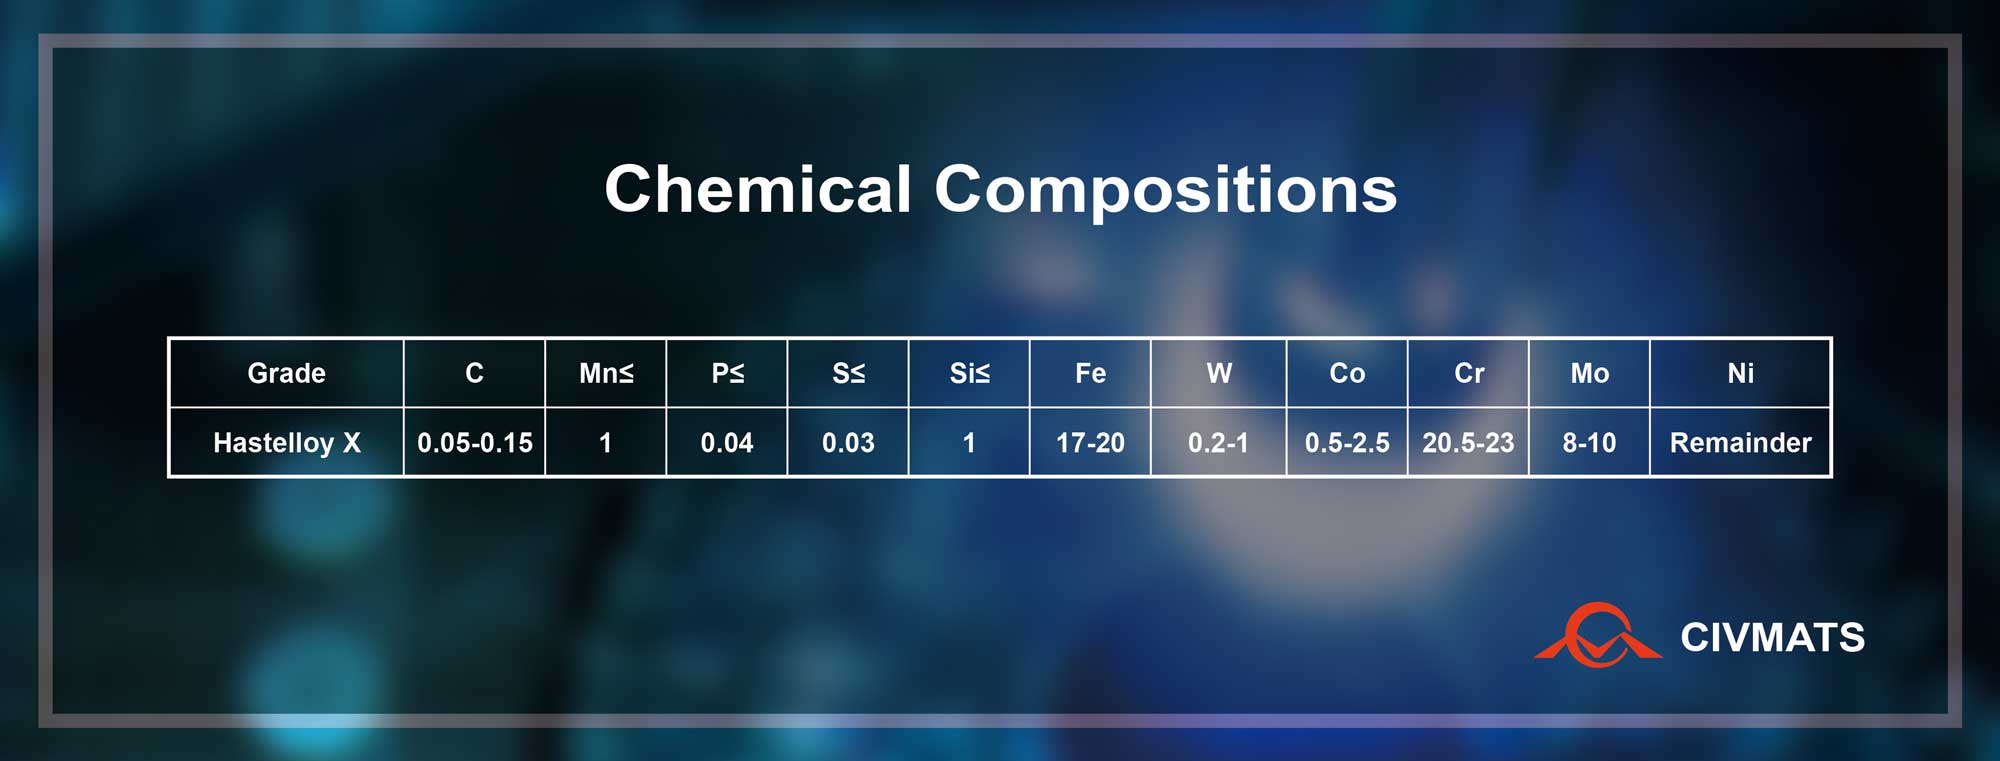 Chemical compositions of Hastelloy X